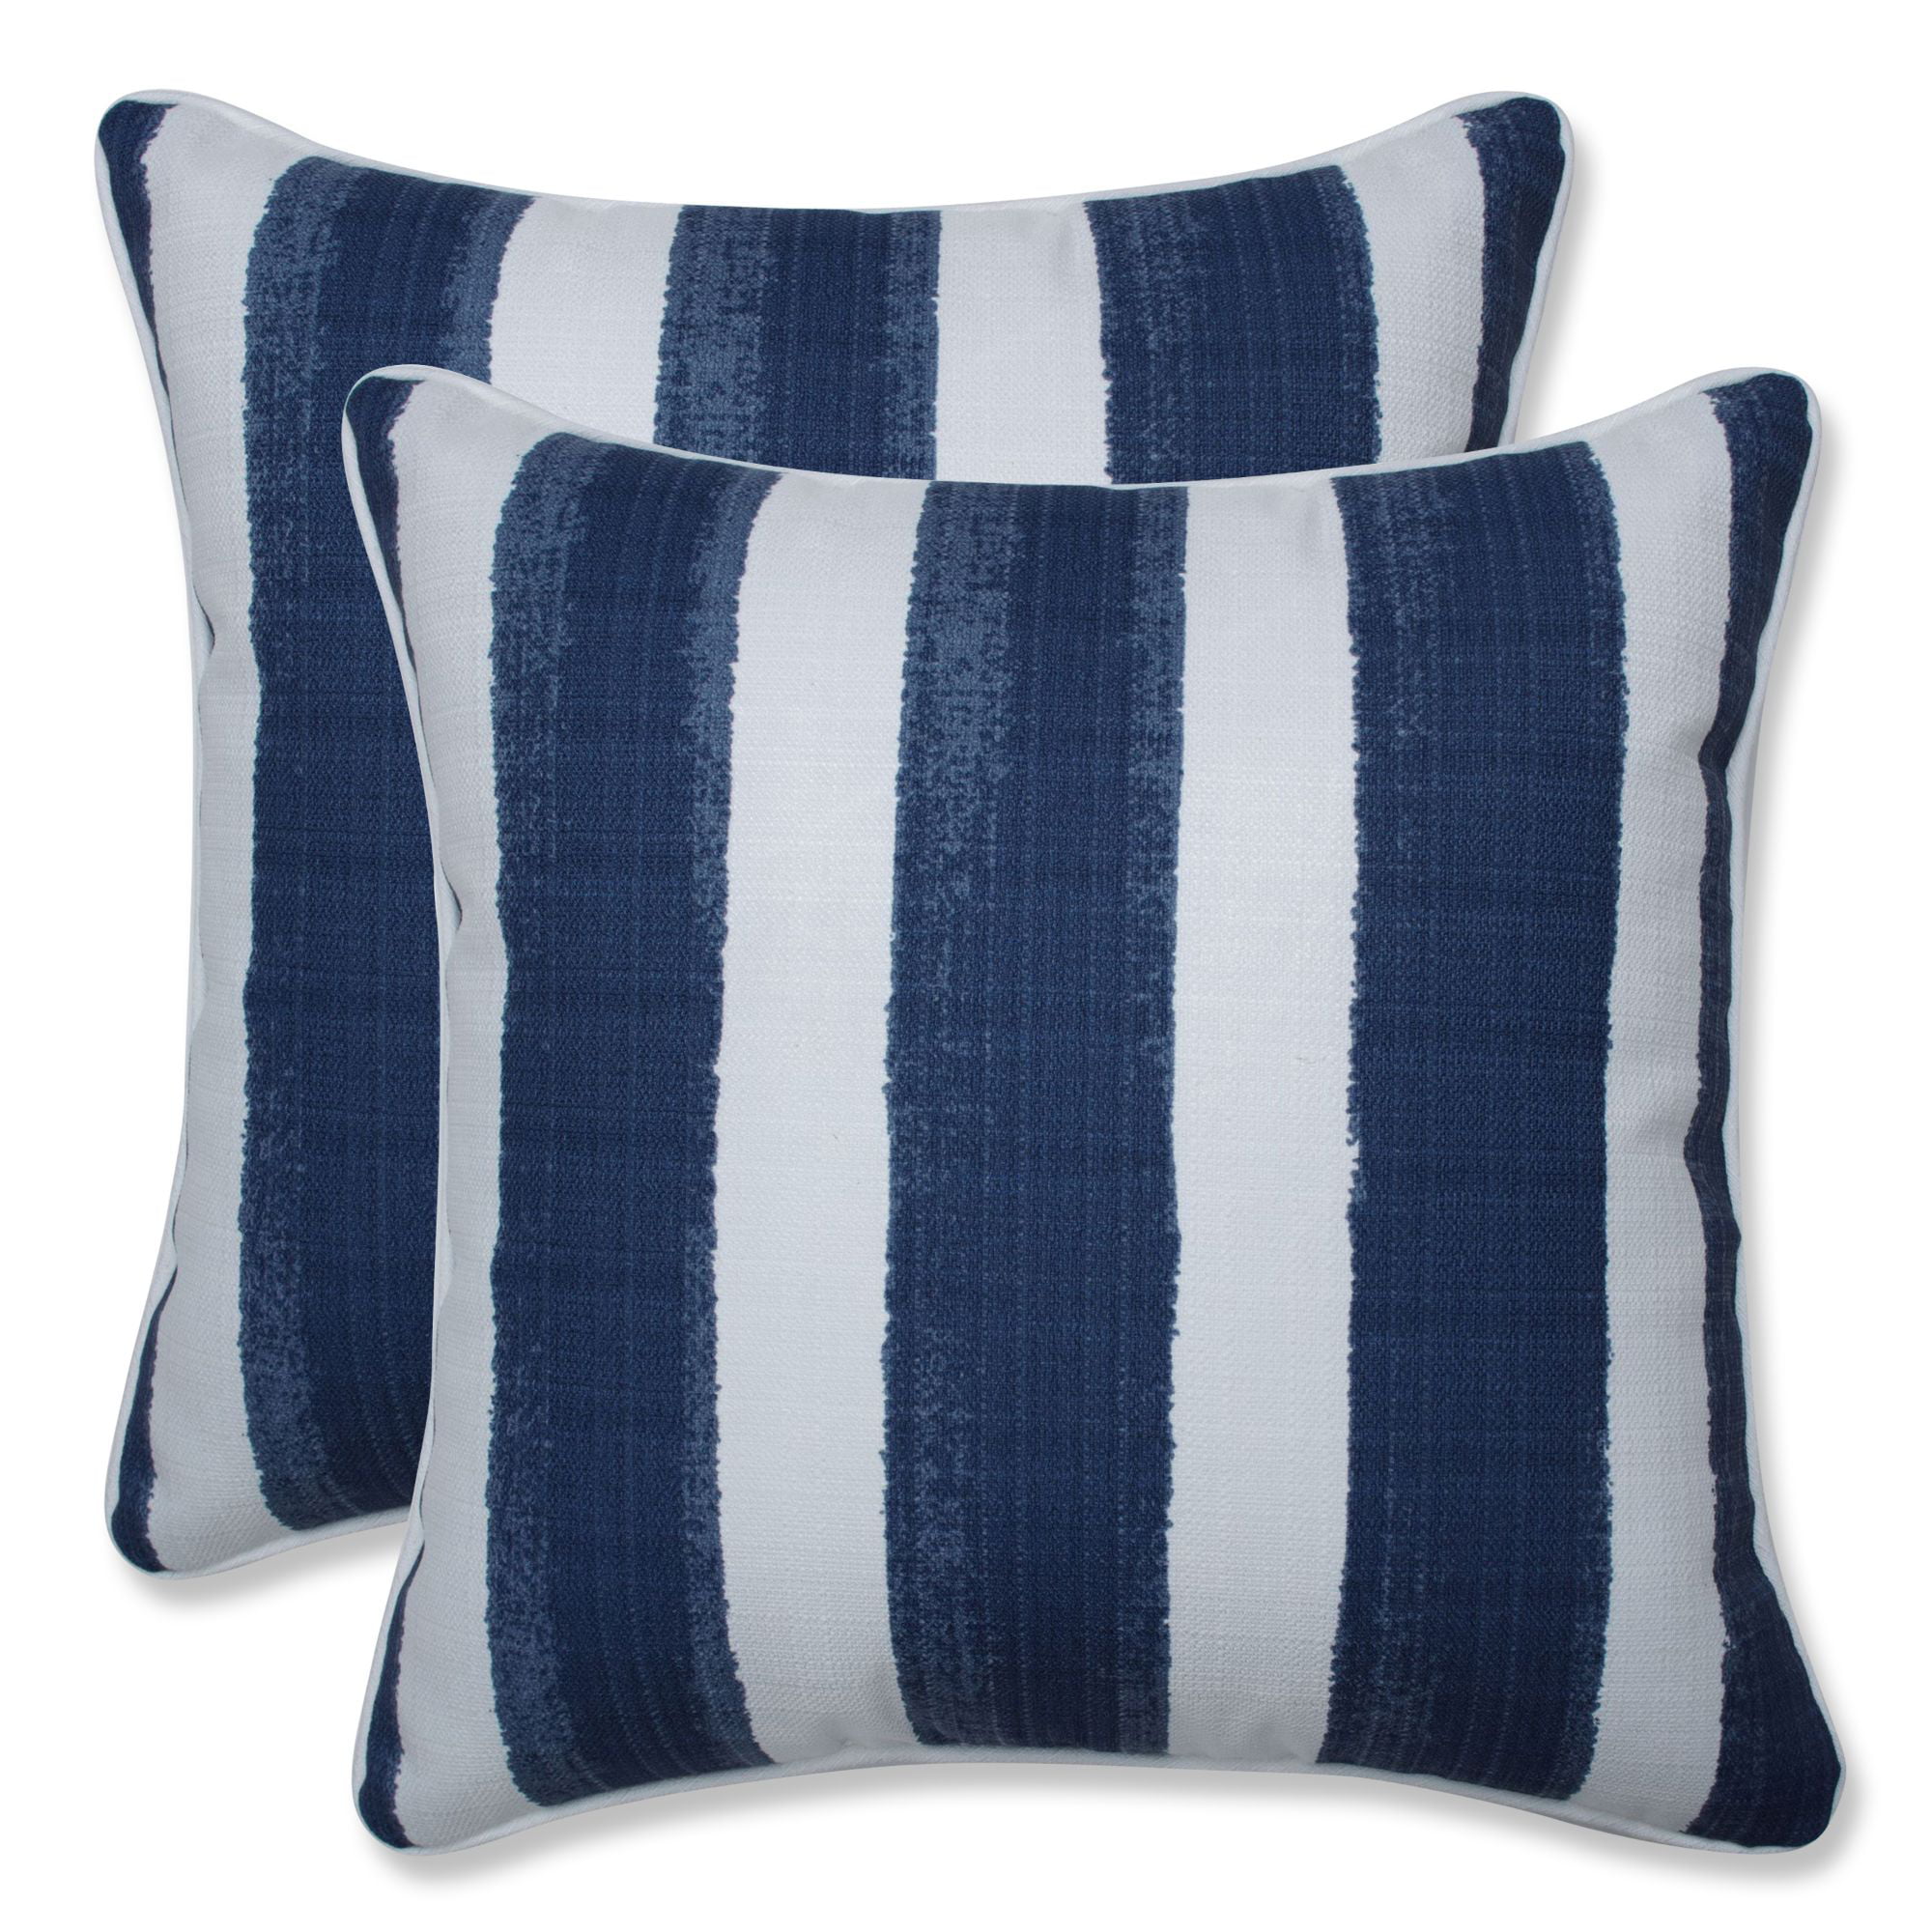 Set of 2 Blue and White Striped UV Resistant Outdoor Patio Square Throw Pillows 16.5" Walmart